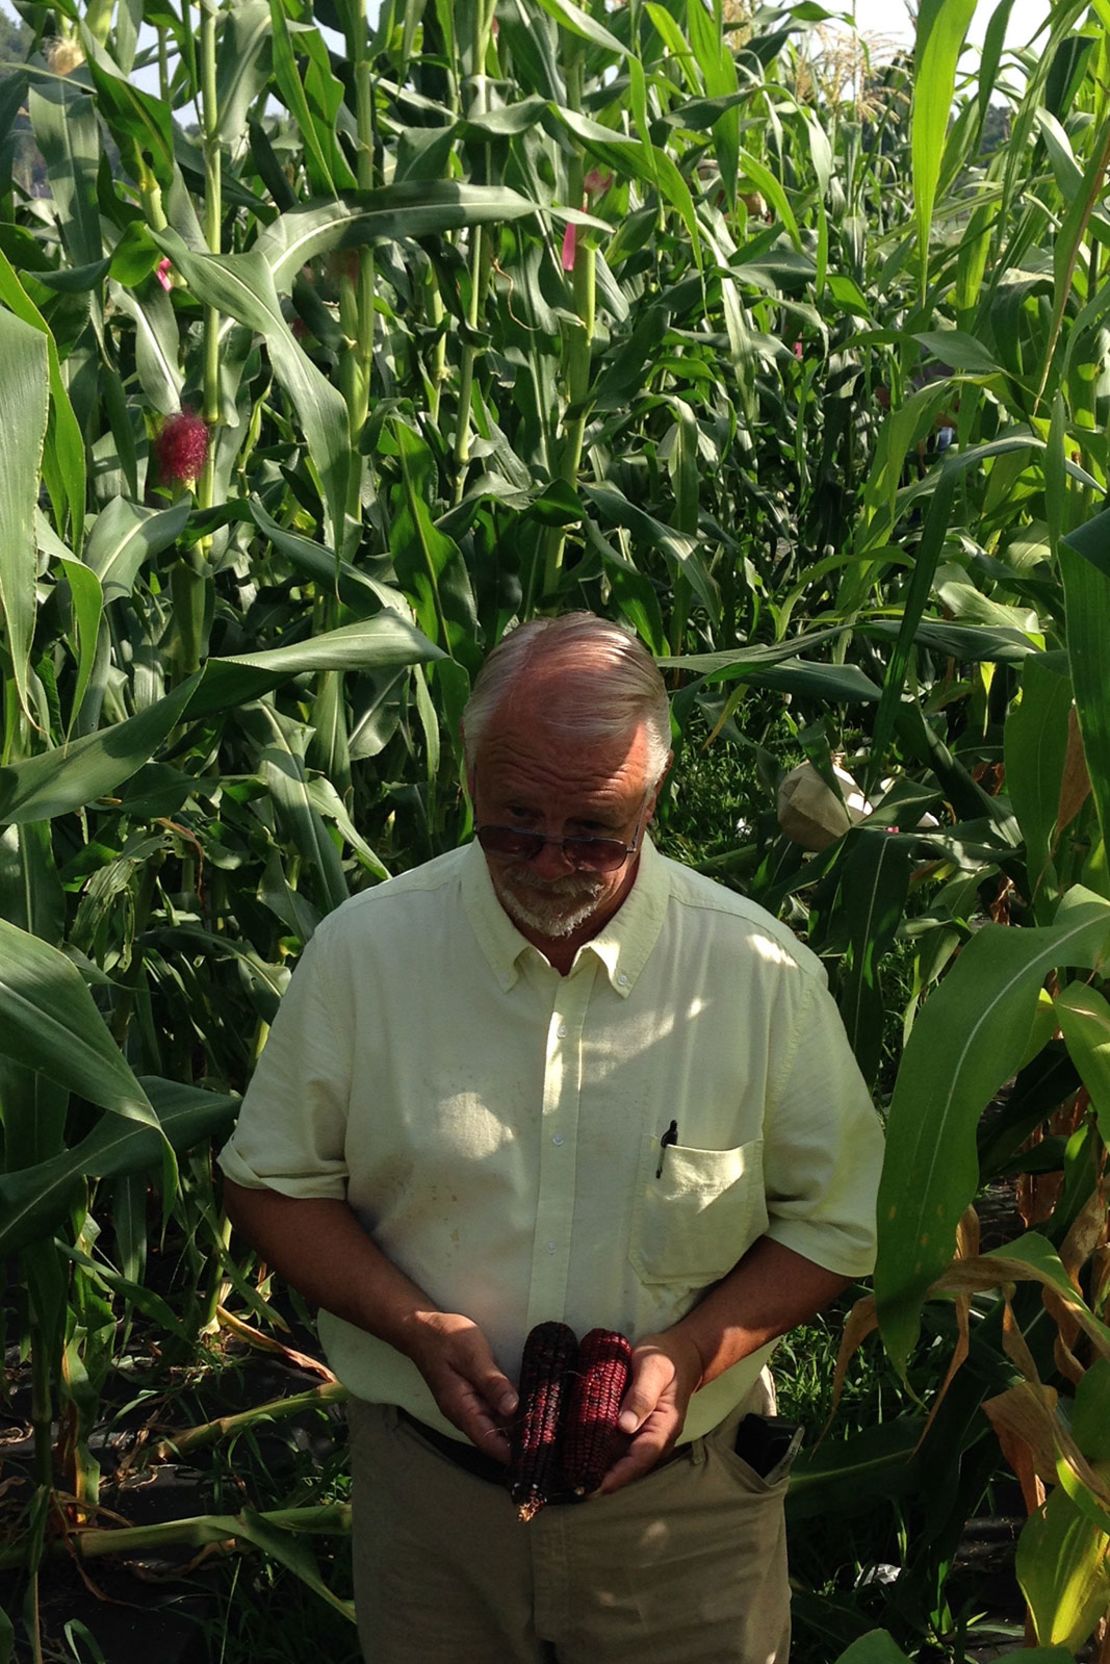 In the late 1990s, farmer Ted Chewning was given the last two ears of Jimmy Red corn known to exist. He used kernels to grow more stalks and pull it from the brink of extinction.